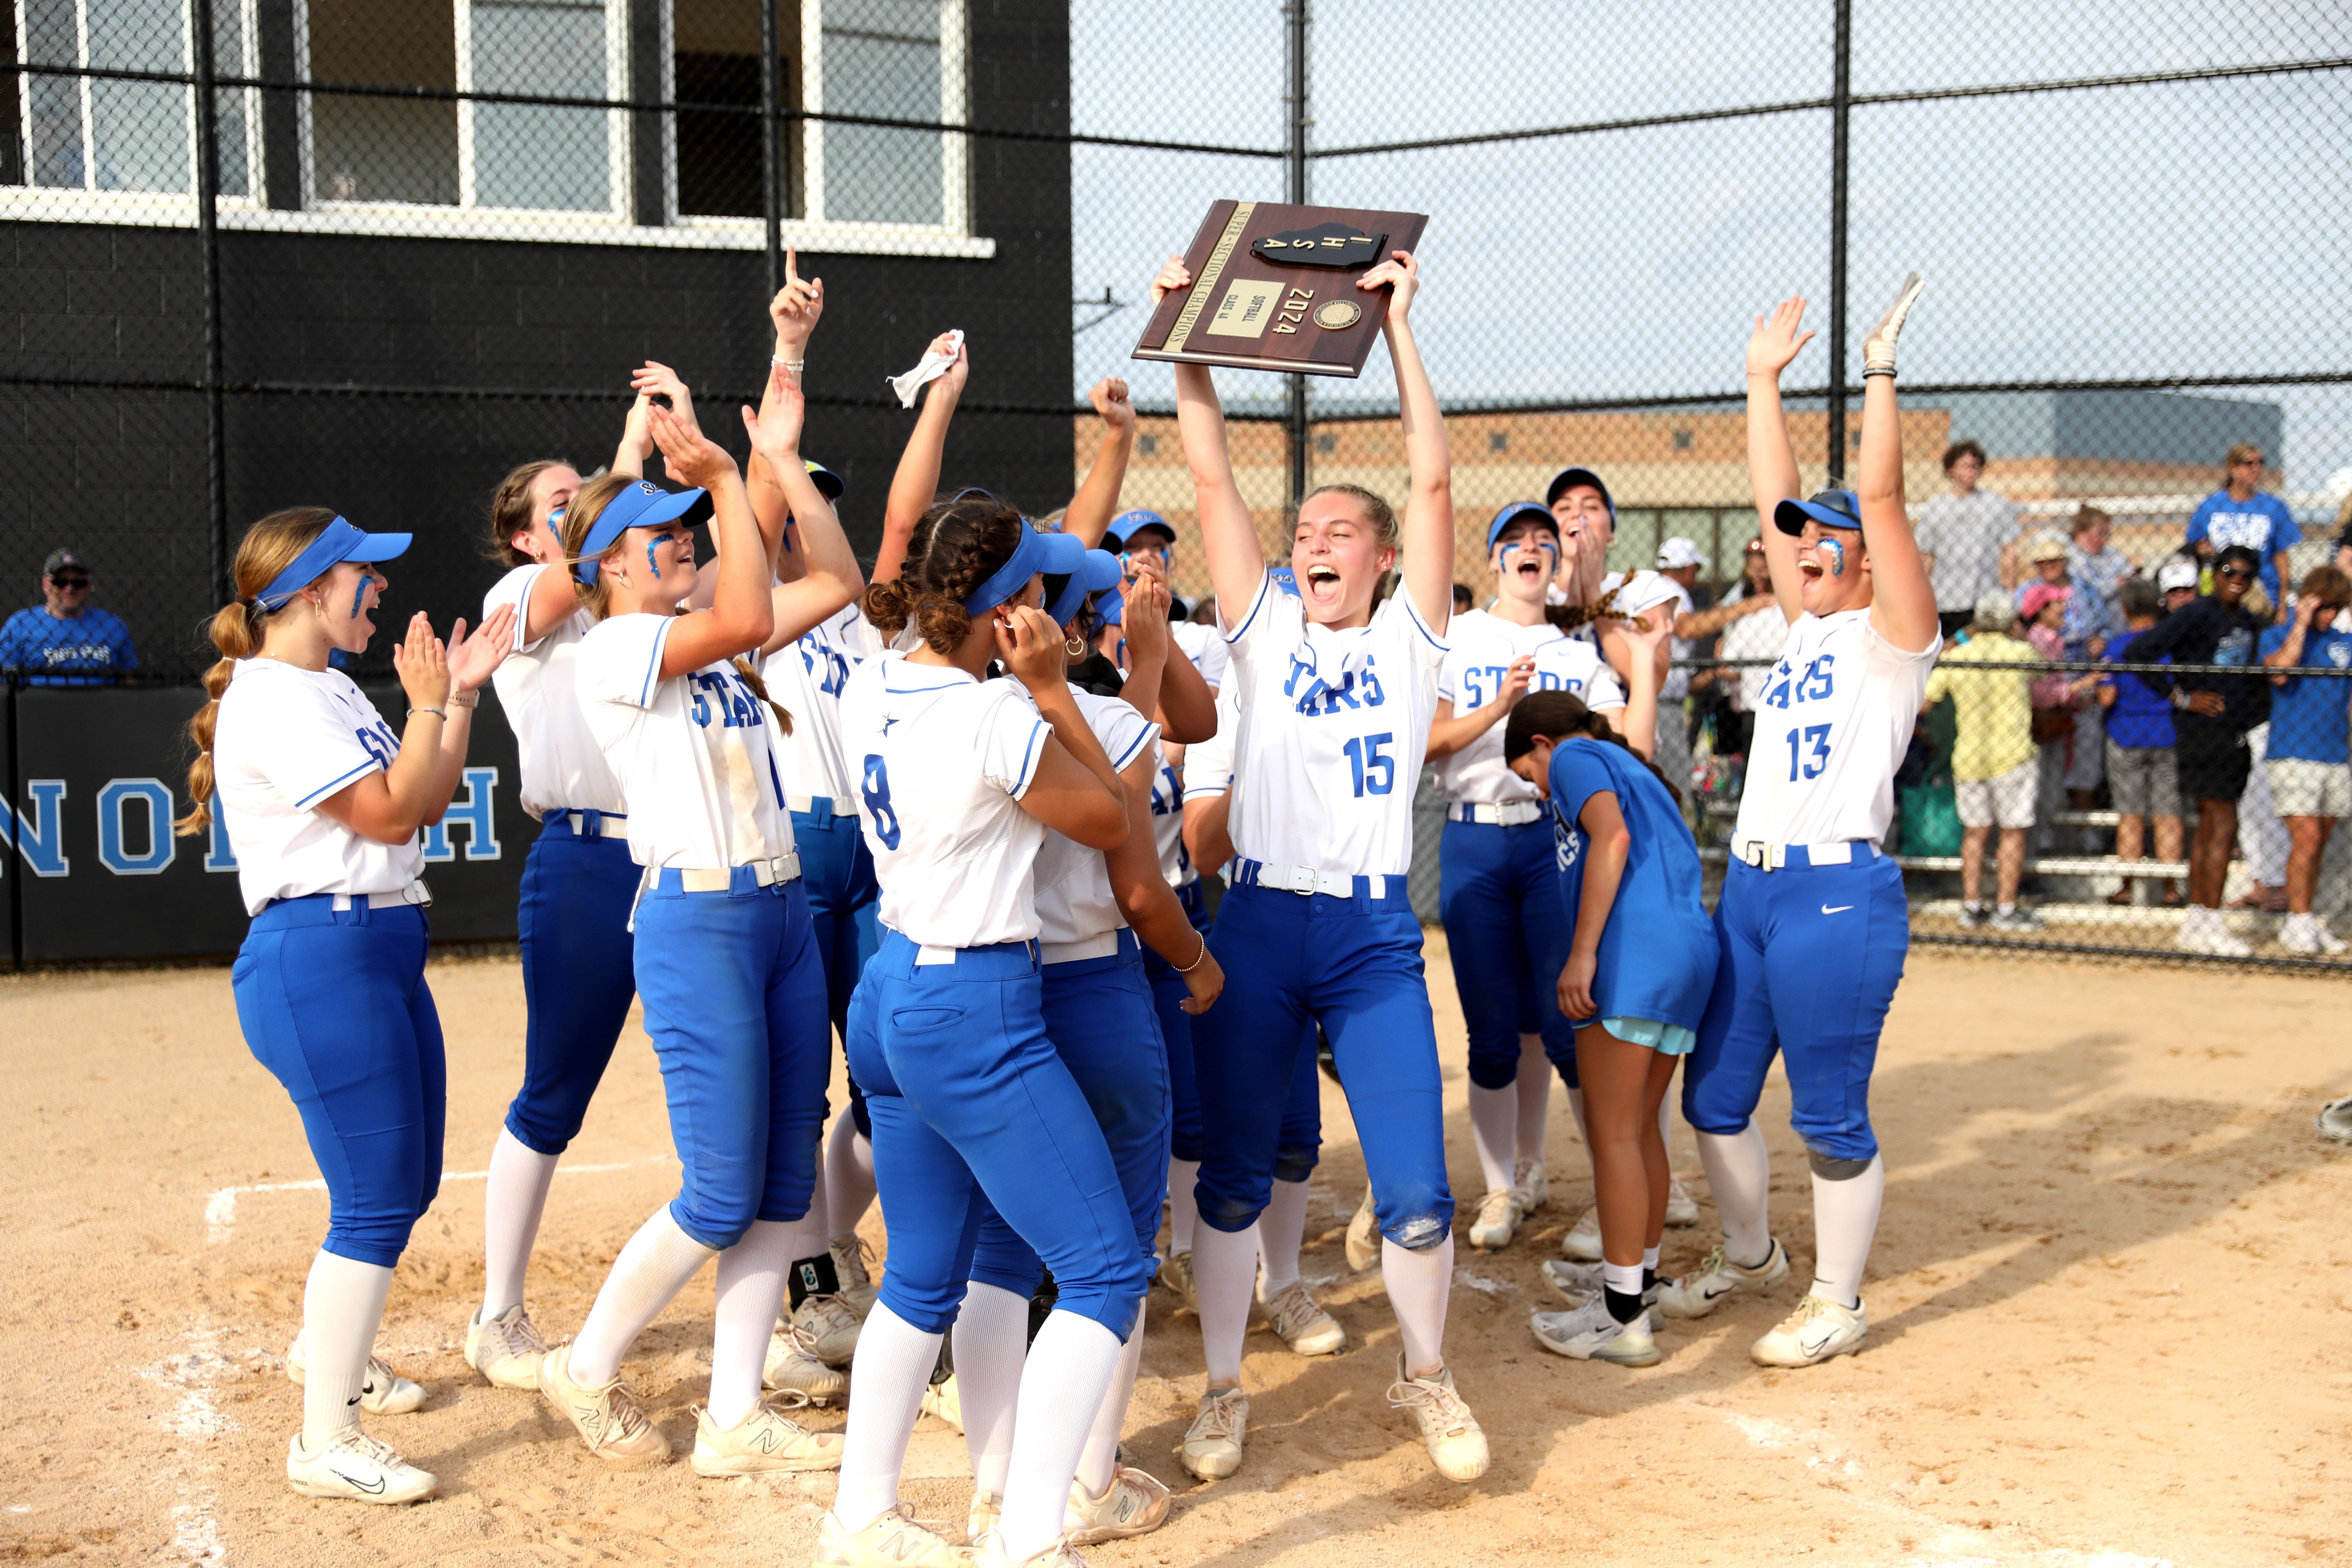 Softball: Paige Murray tosses no-hitter against Whitney Young to punch ticket to state tournament